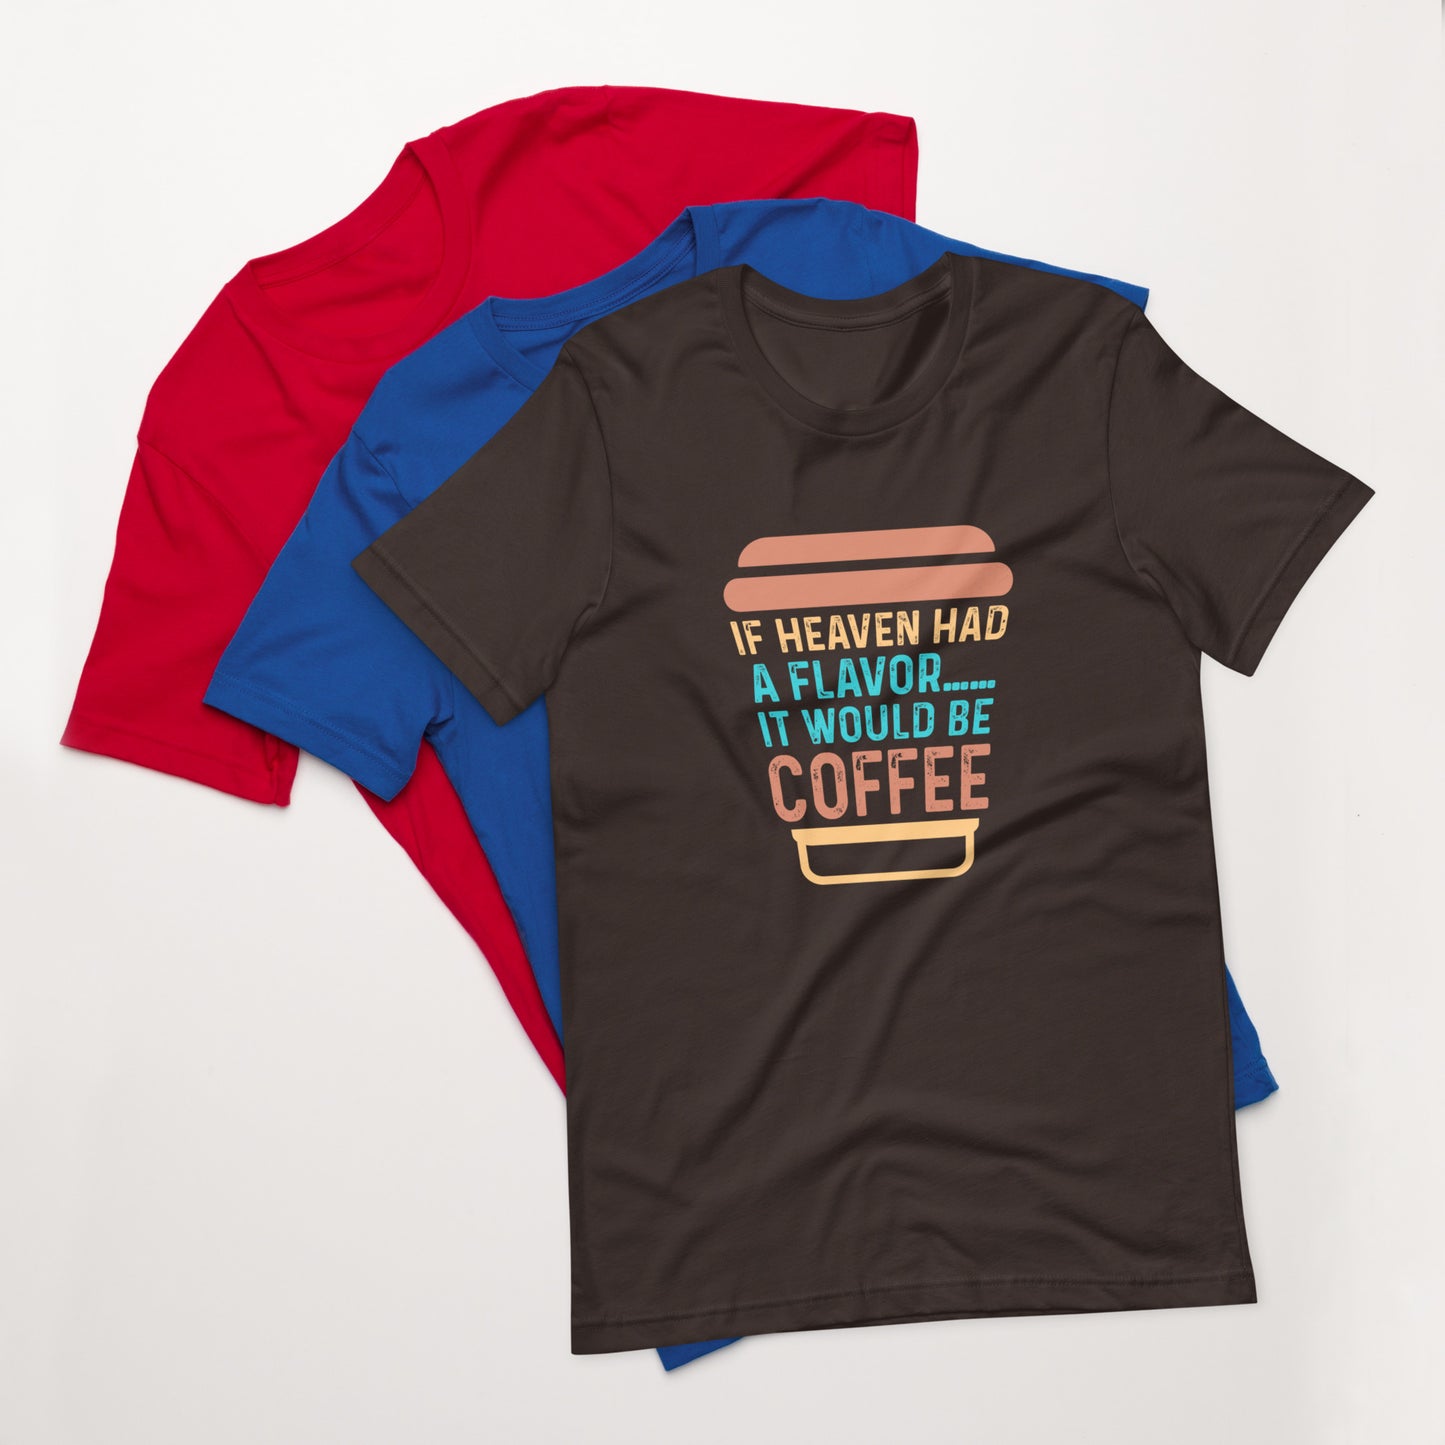 If Heaven Had a Flavor it Would be Coffee Unisex t-shirt